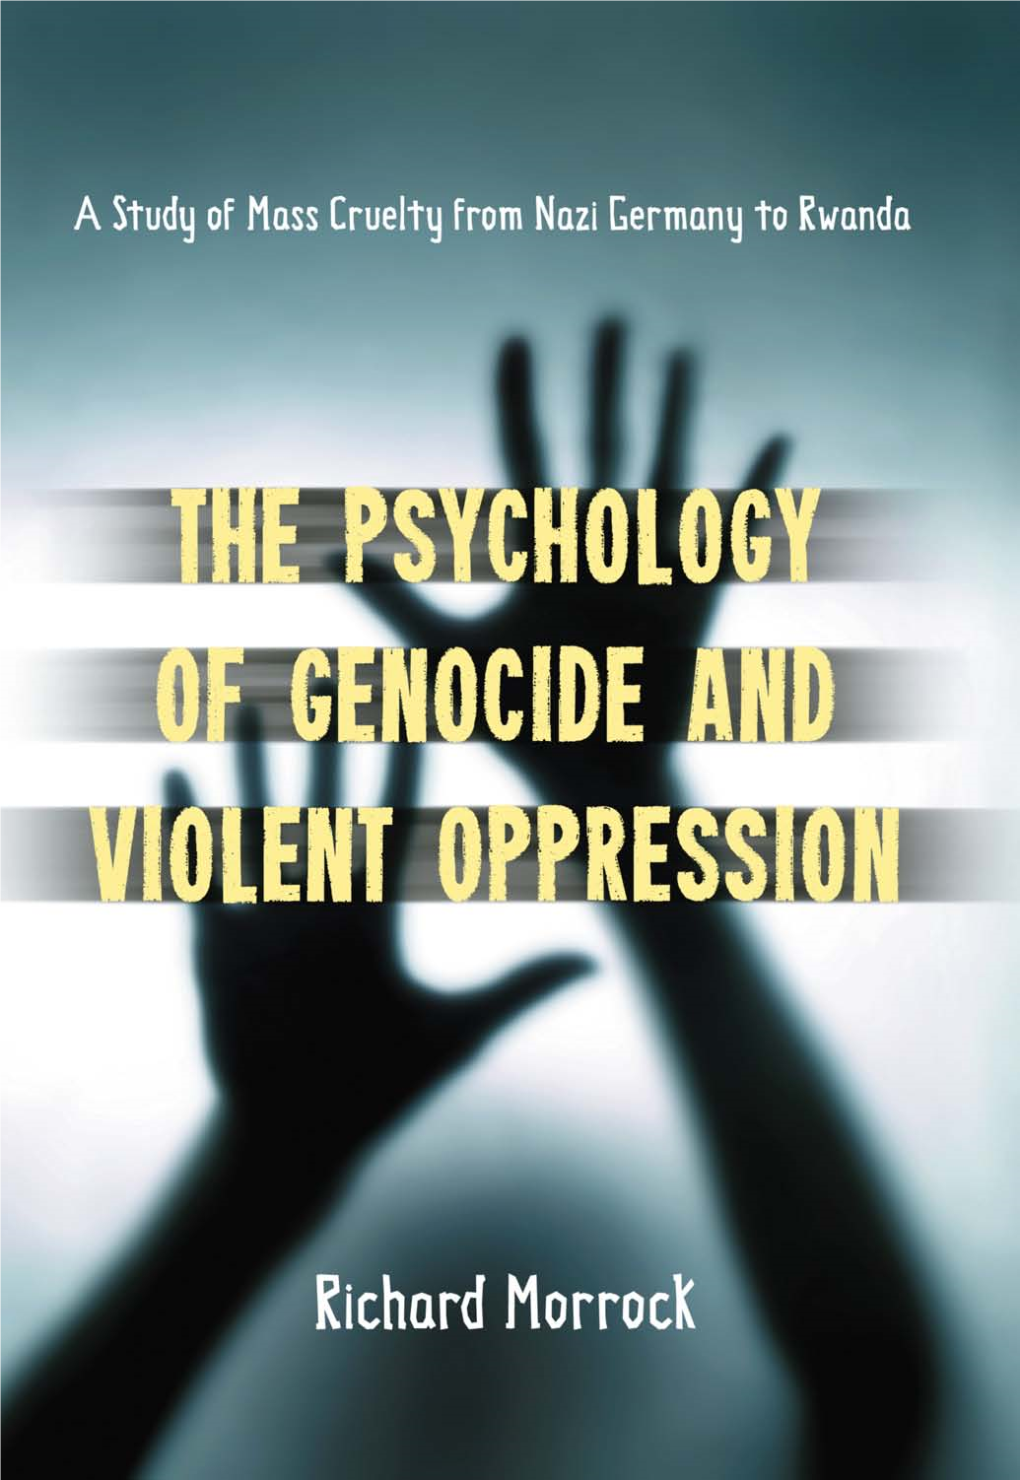 The Psychology of Genocide and Violent Oppression